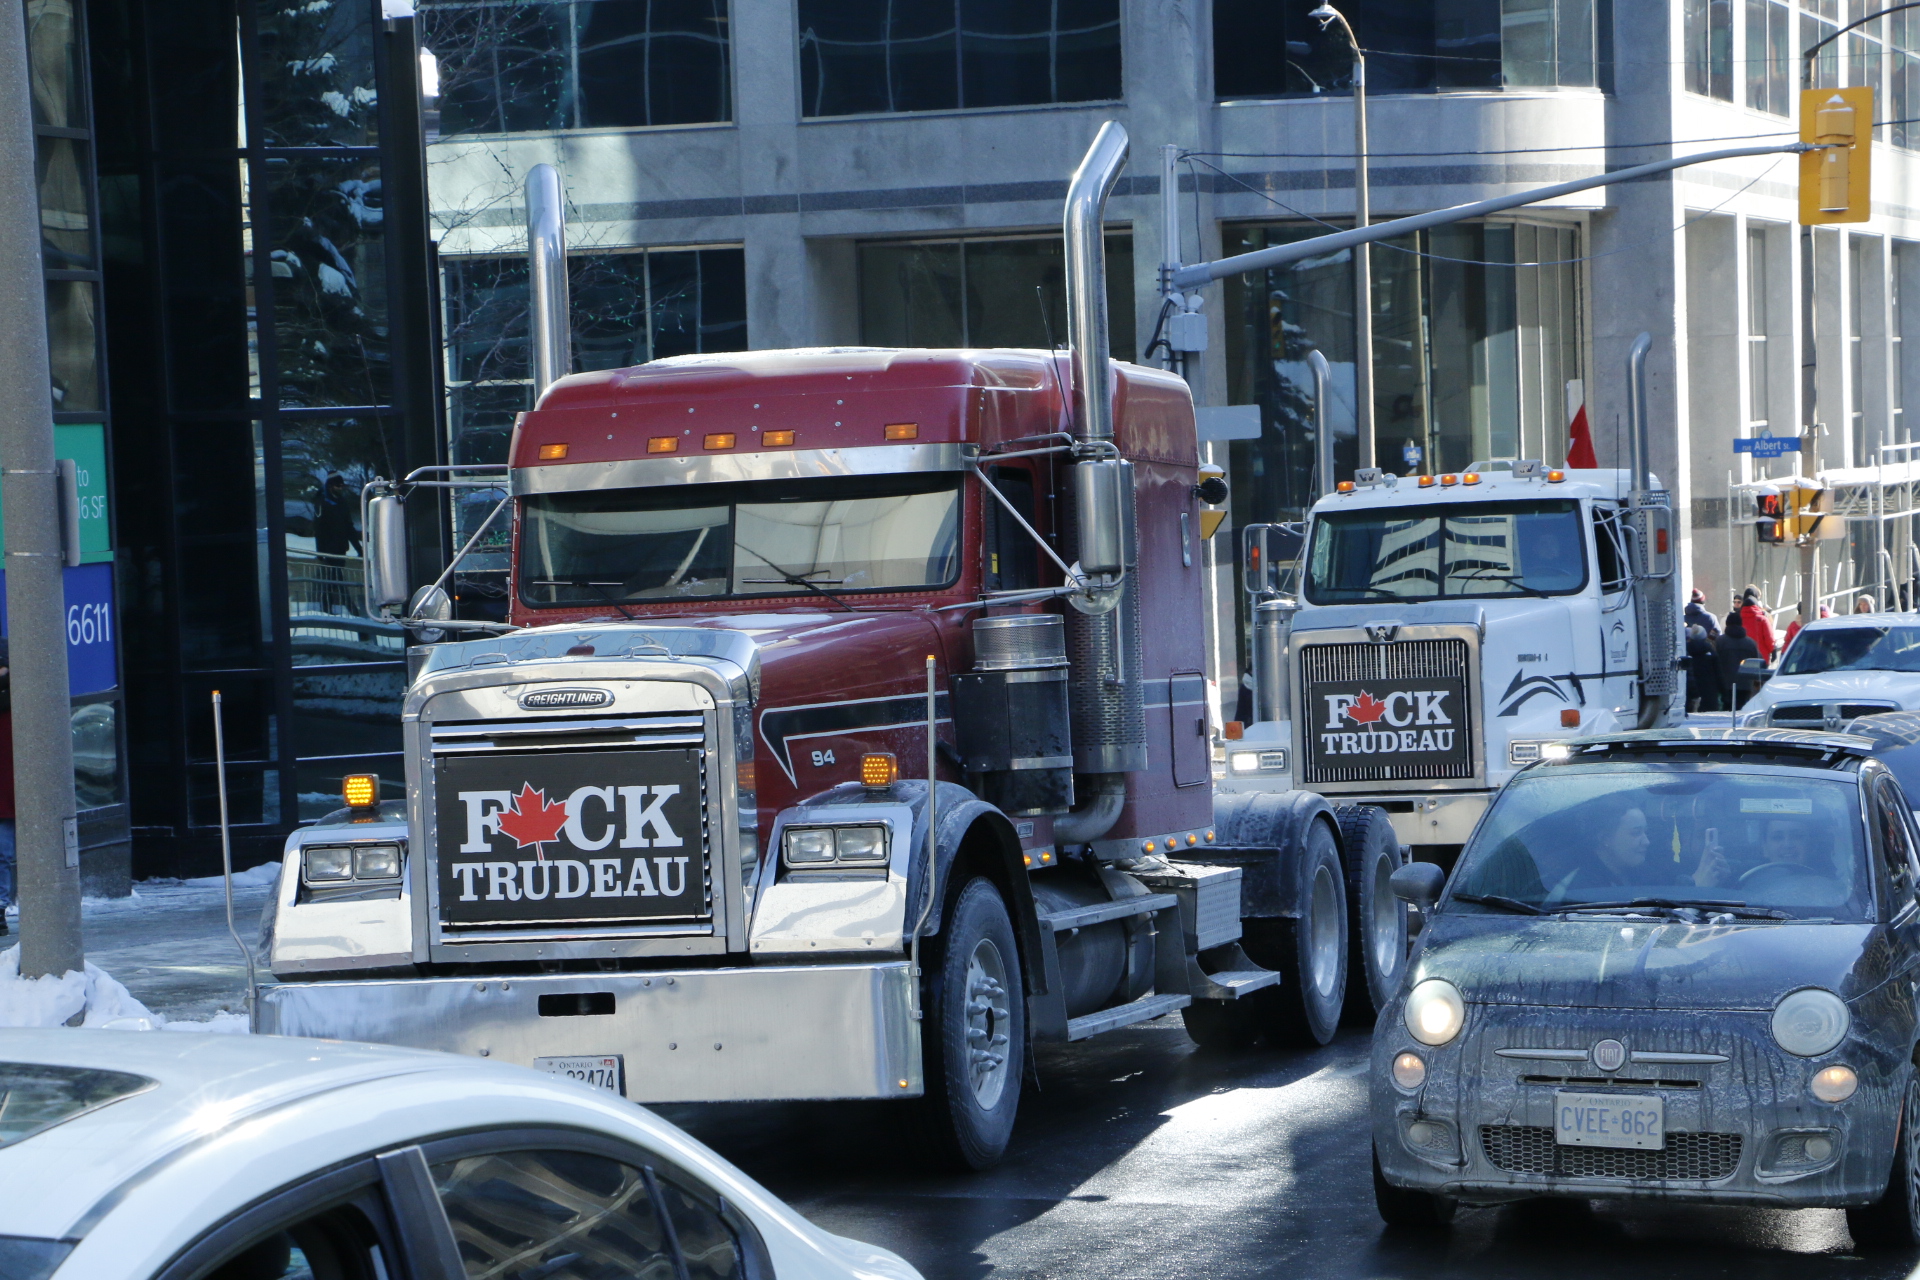 US Capitol Police Plan ‘Extra Security’ Ahead of SOTU, Cite Potential Arrival of Truck Convoys